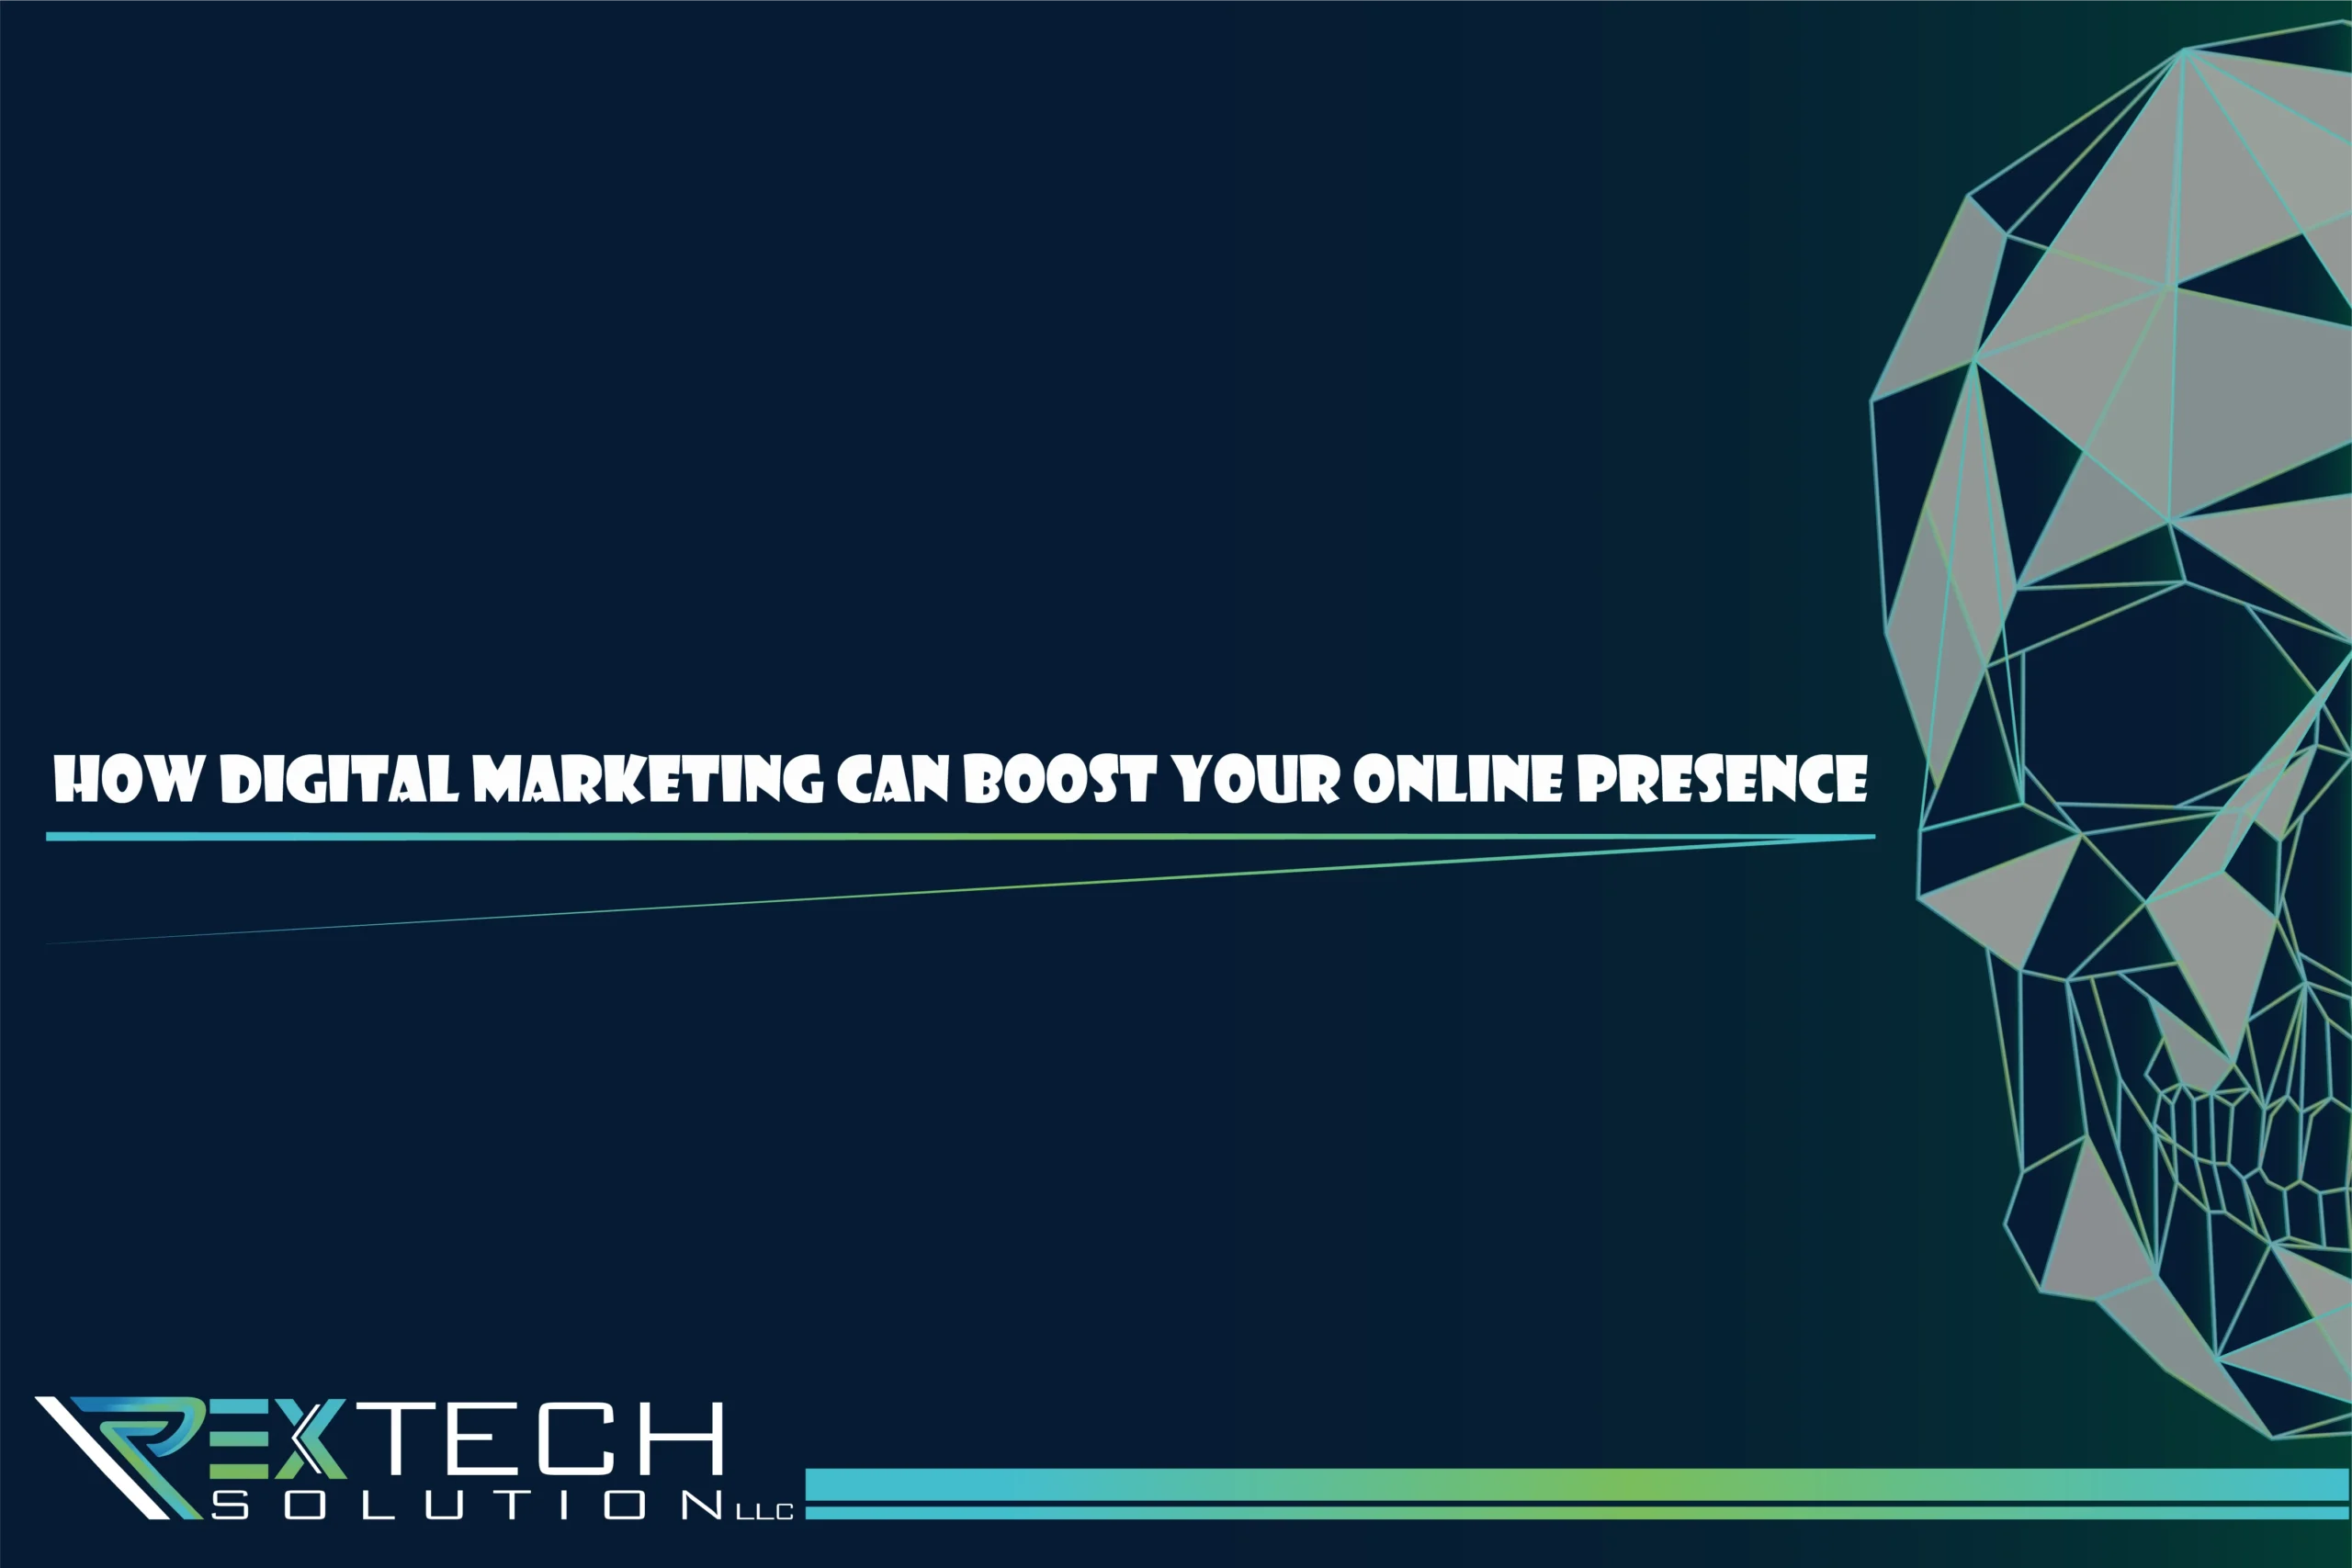 How Digital Marketing Can Boost Your Online Presence